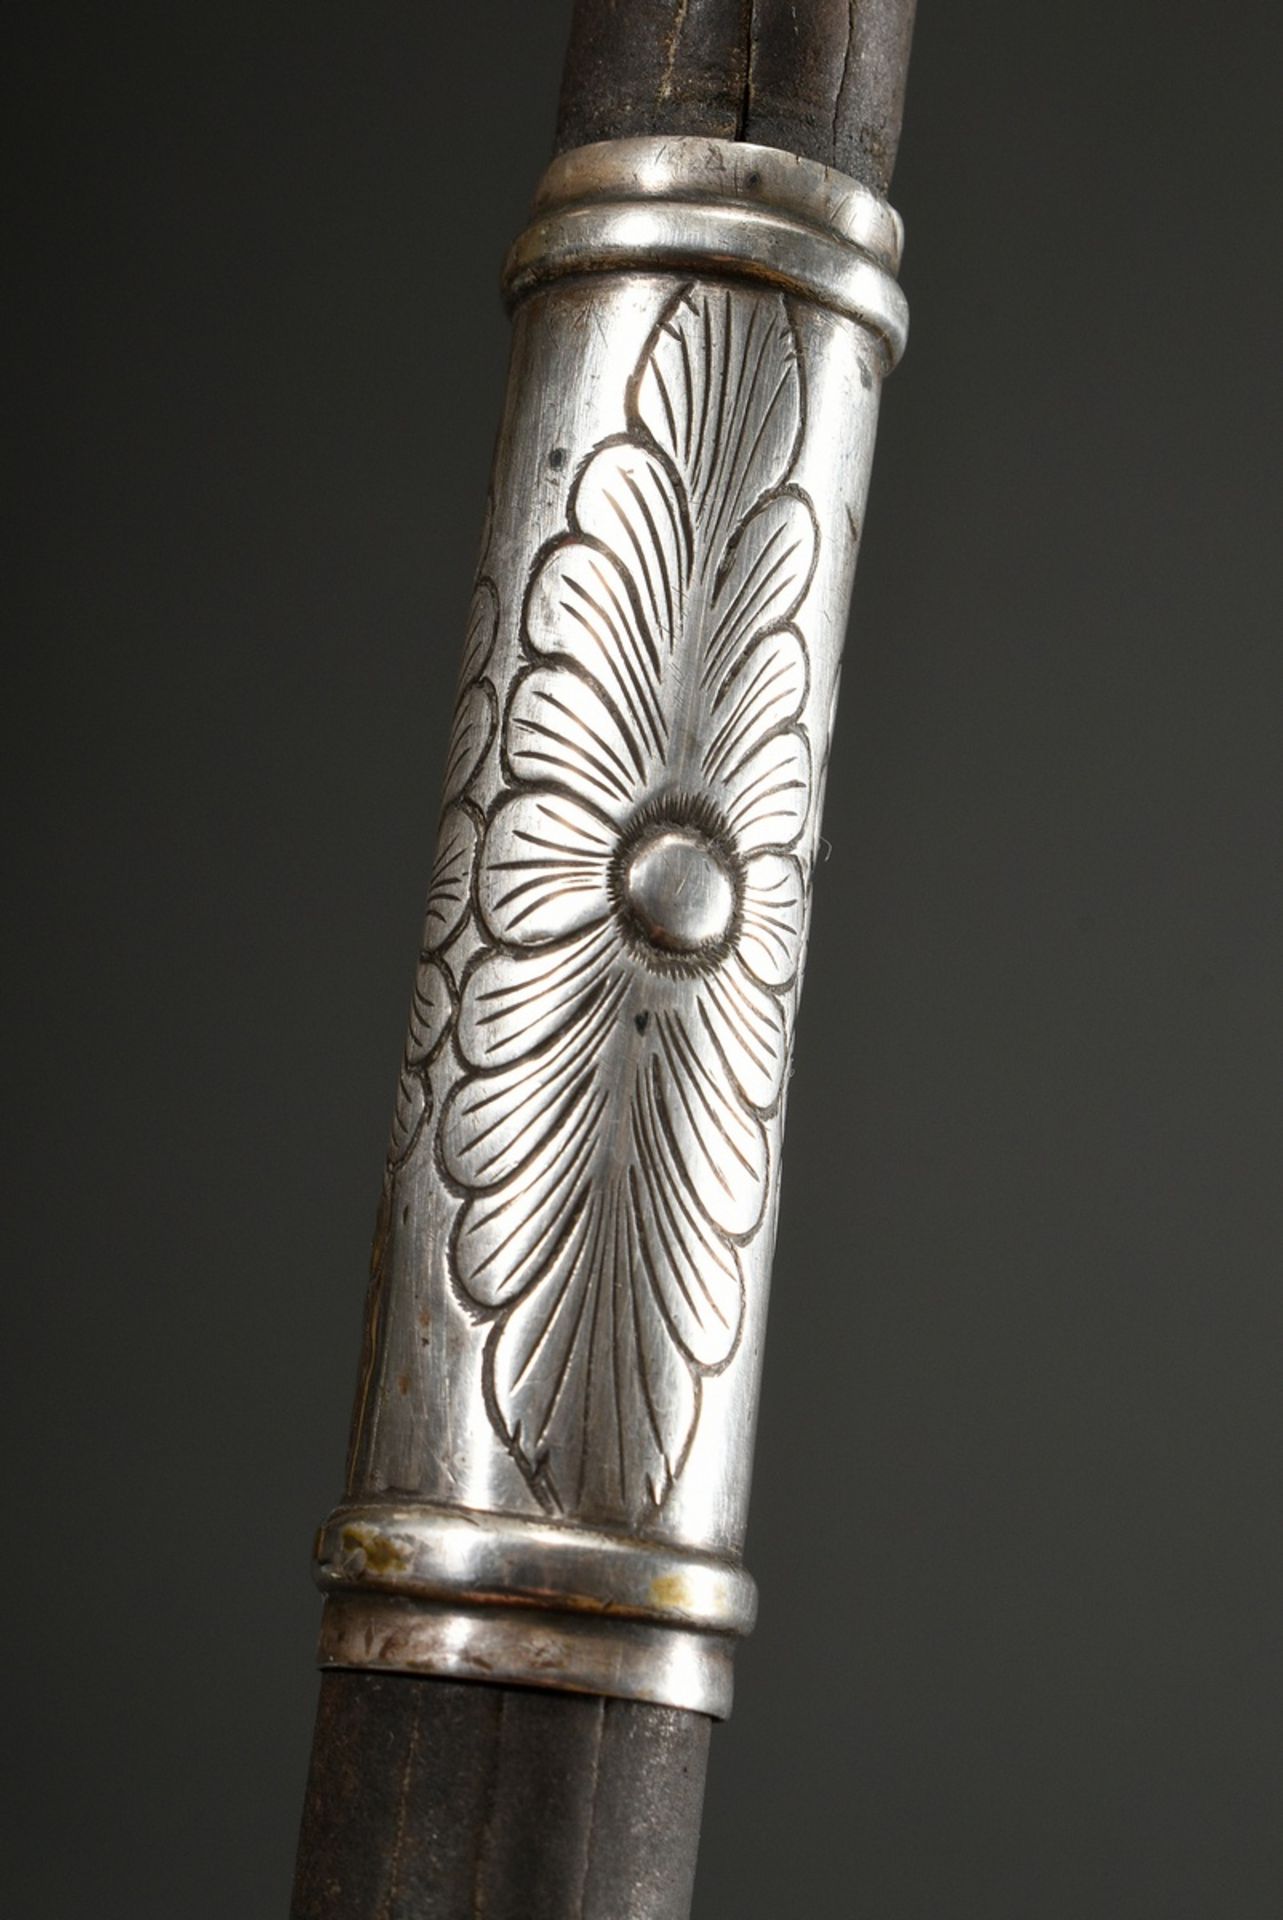 South American gaucho whip so-called Rebenque, leather with florally embossed silver cuffs and hand - Image 2 of 5